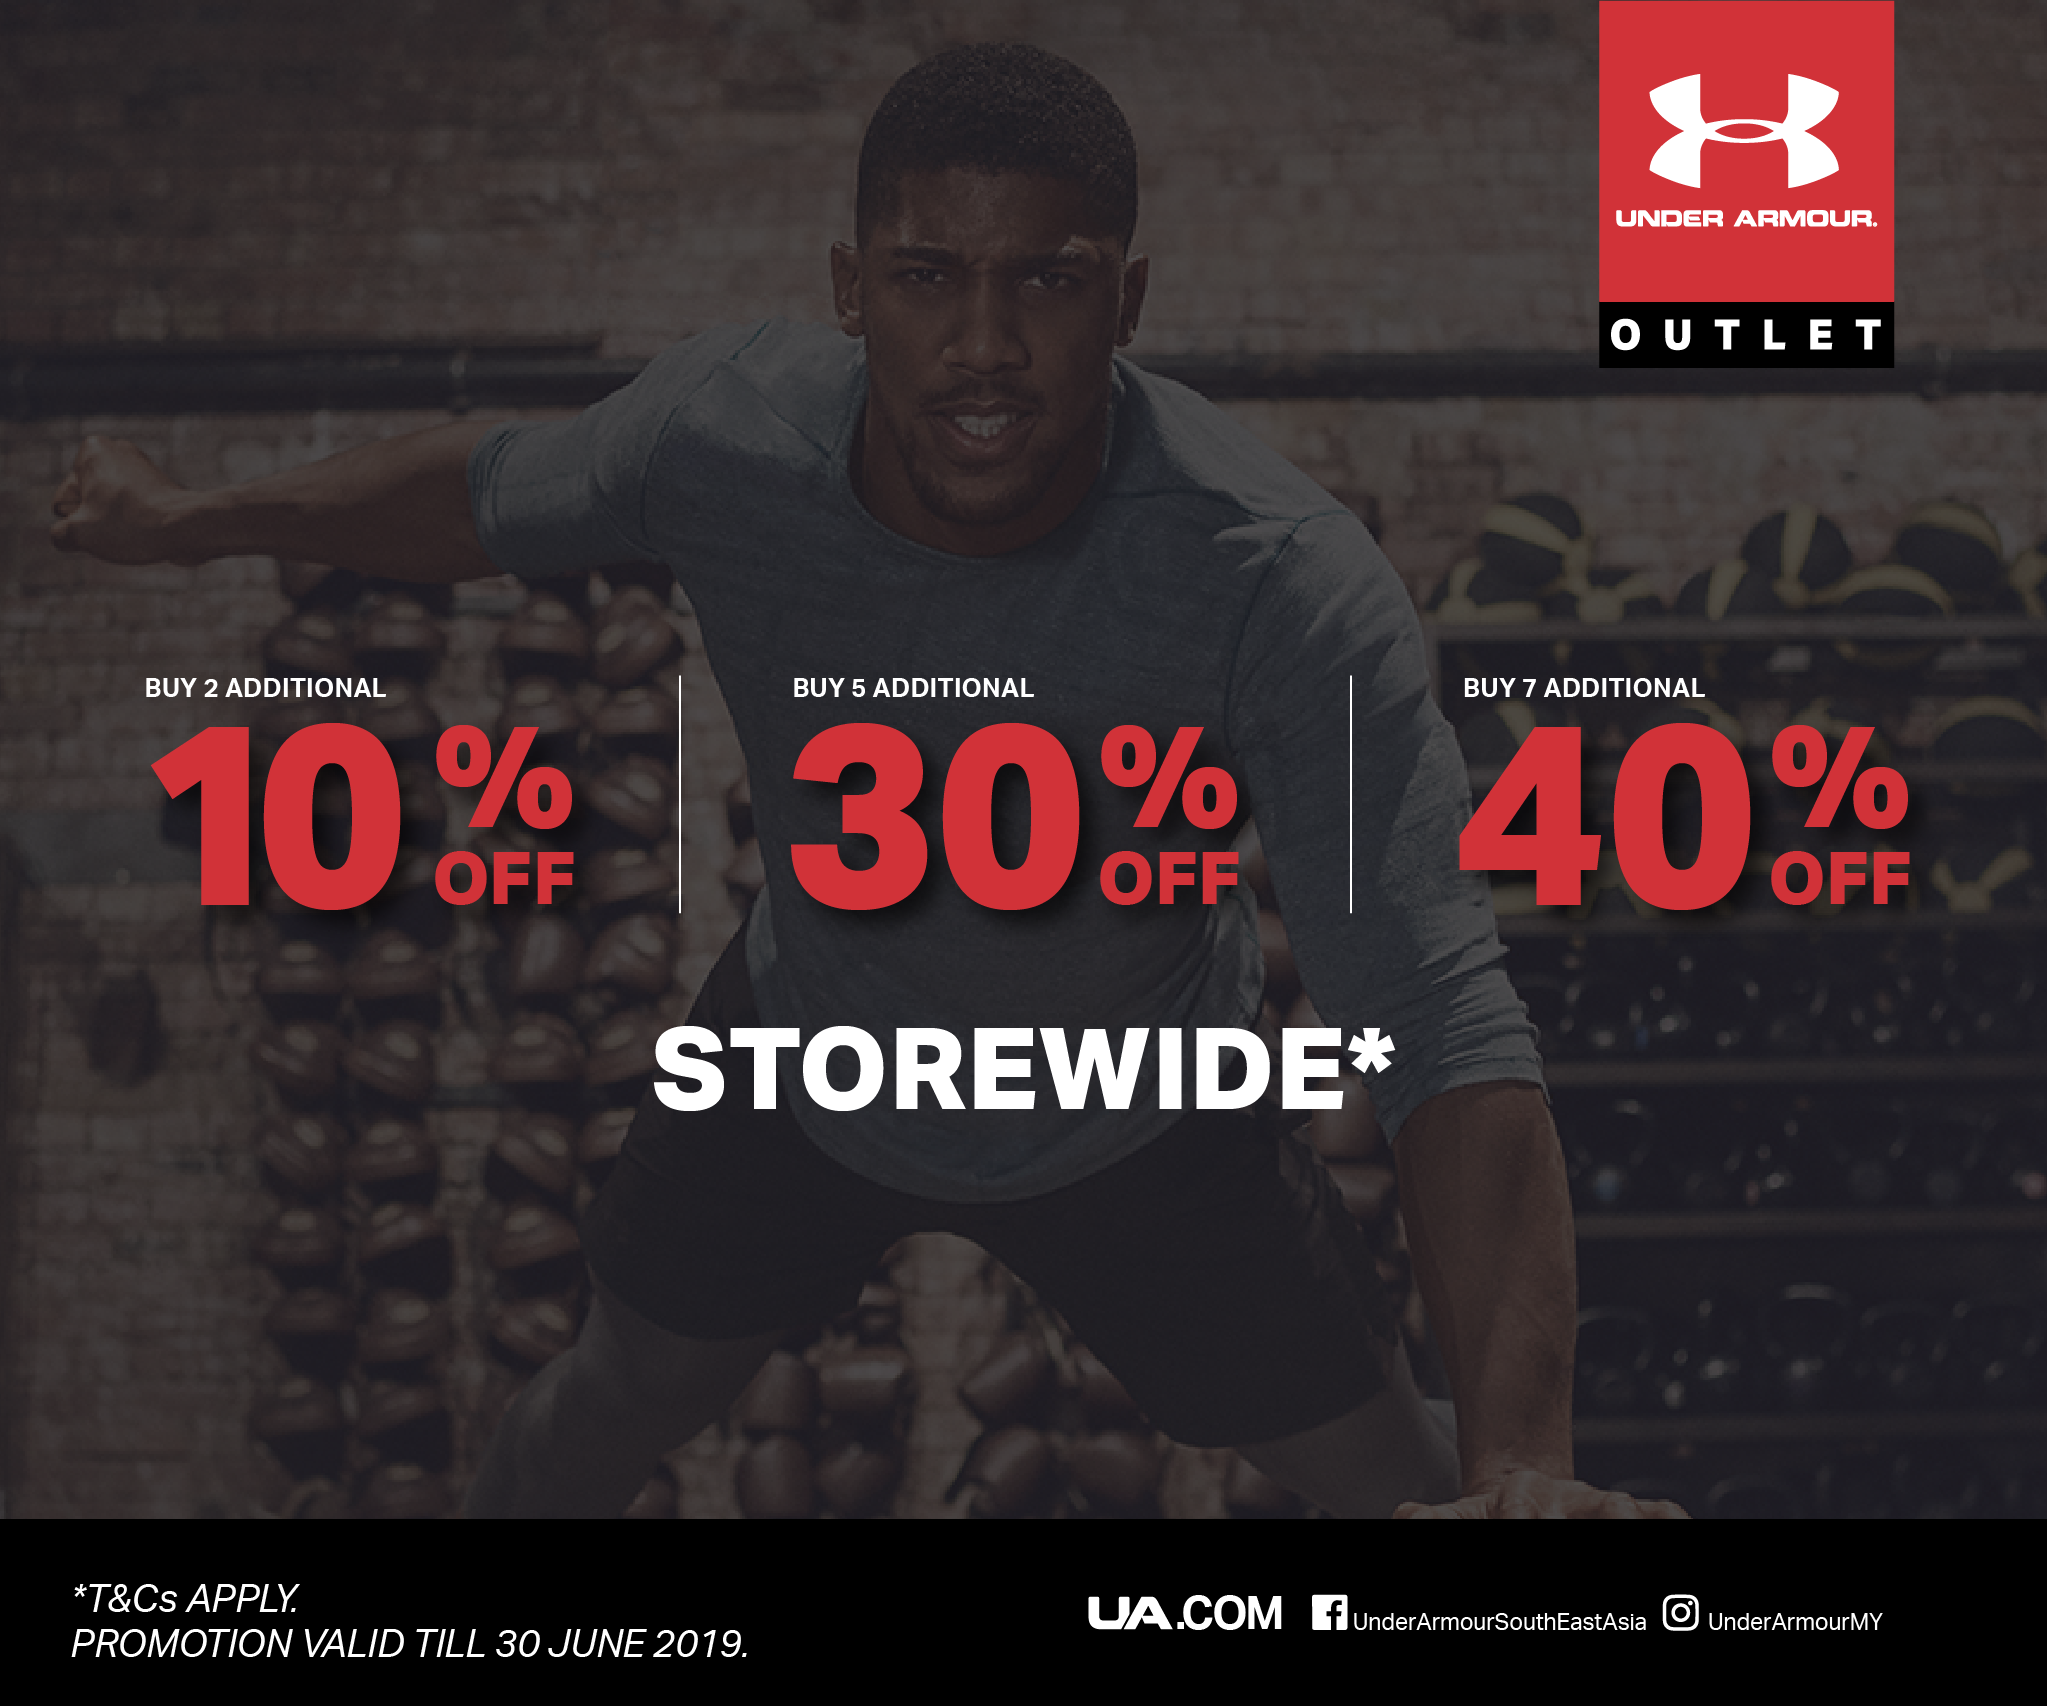 under armour outlet promo